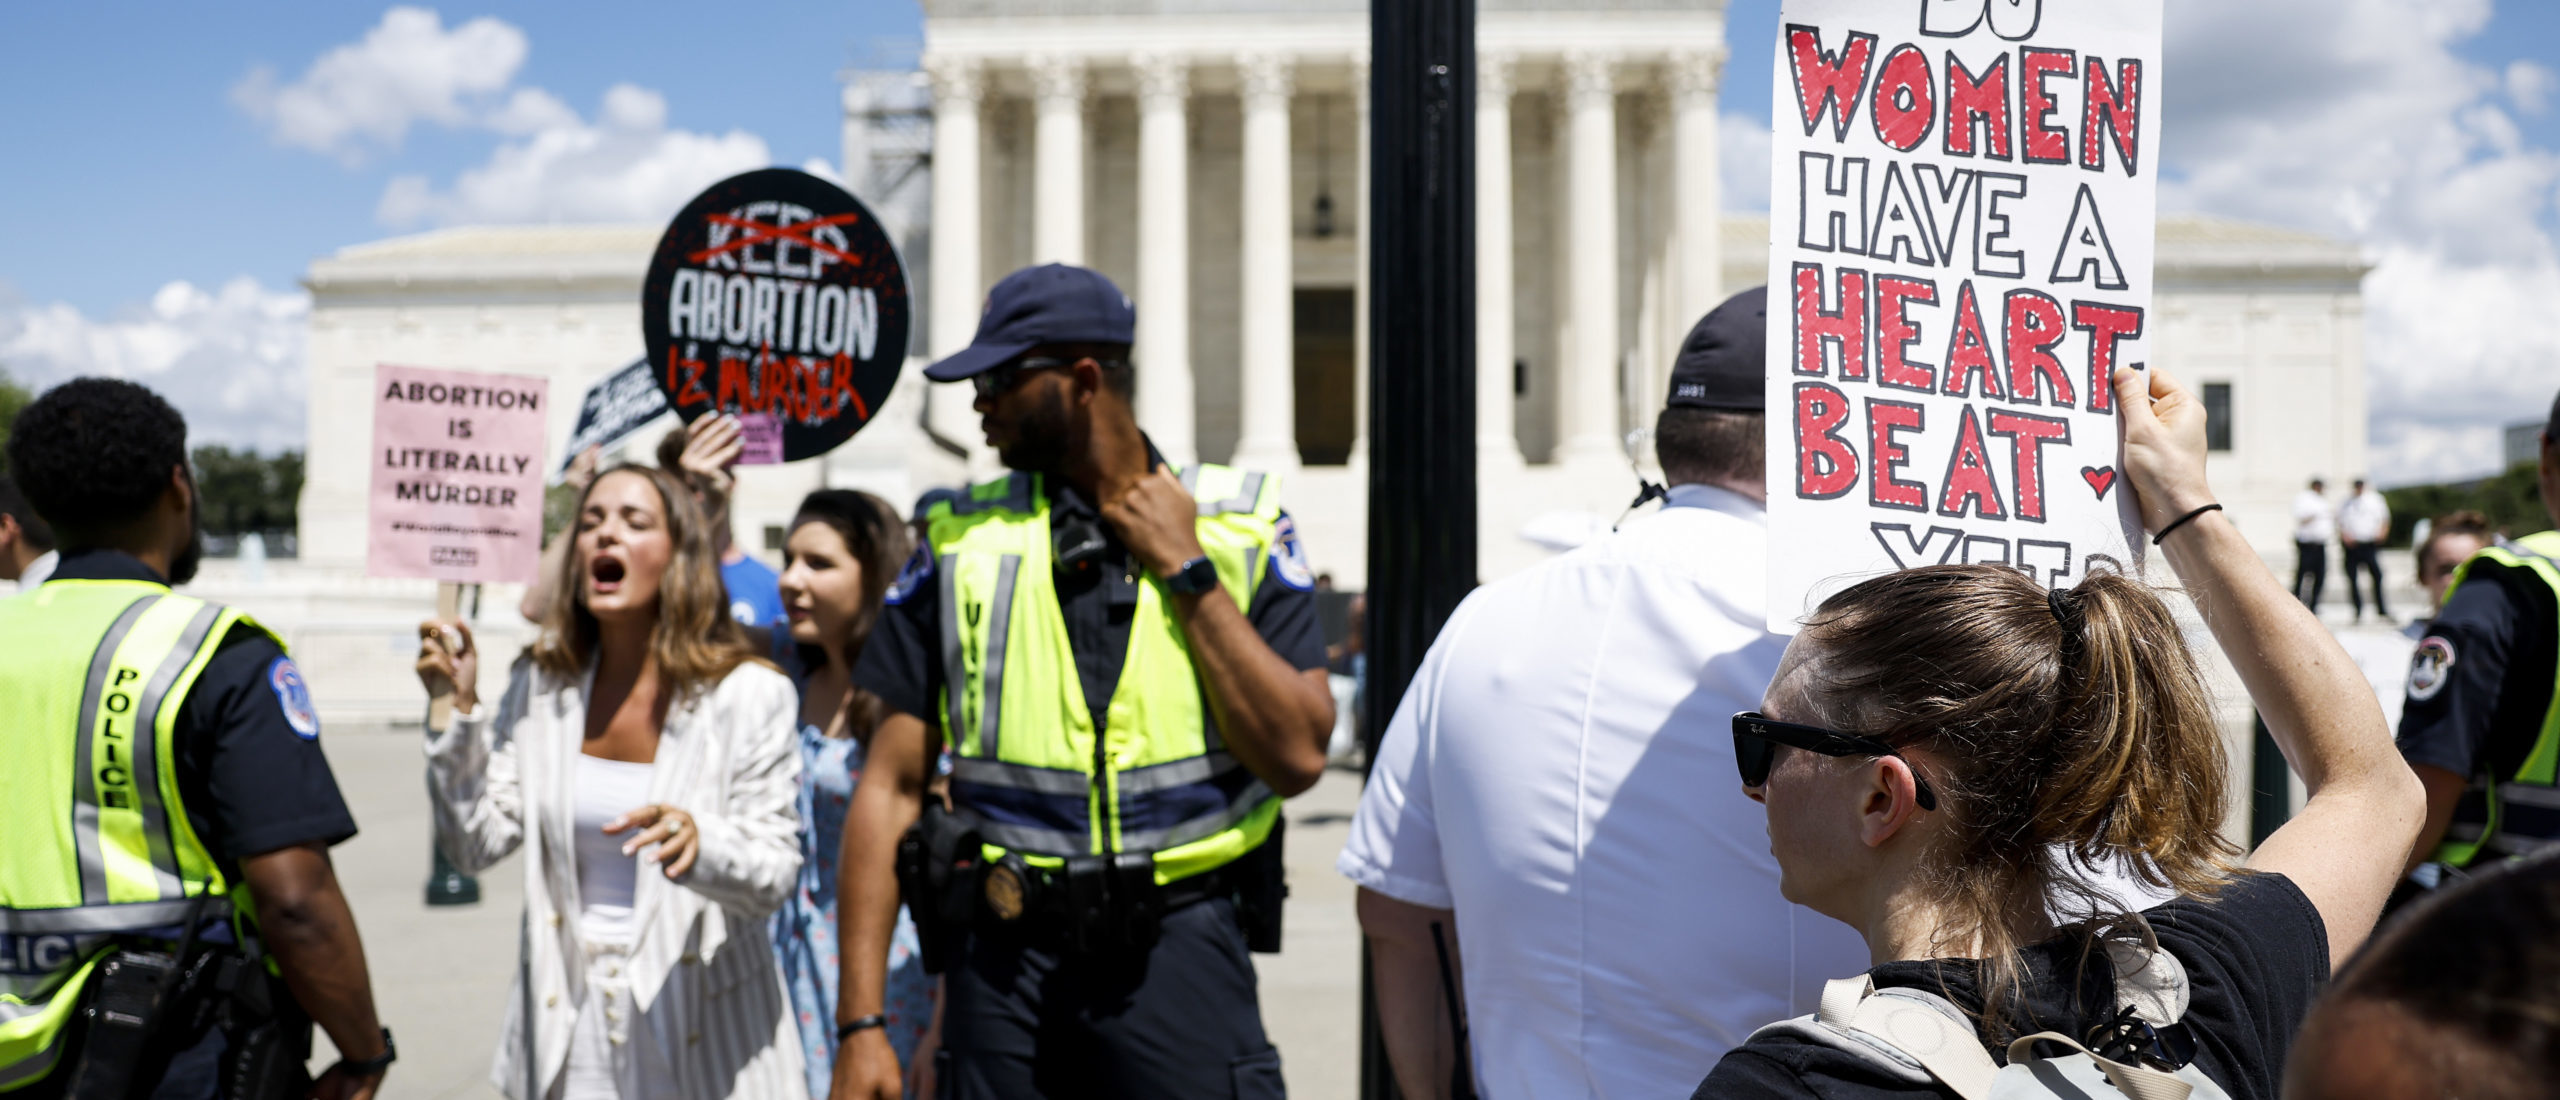 WASHINGTON, DC - JUNE 24: Anti-abortion activists protest near a Women's March rally in front of the U.S. Supreme Court Building on June 24, 2023 in Washington, DC. The rally was organized by abortion rights activists and held to mark the one year anniversary of the U.S. Supreme Court’s decision in Dobbs v Jackson Women’s Health, which overturned Roe v Wade and erased federal protections for abortions.